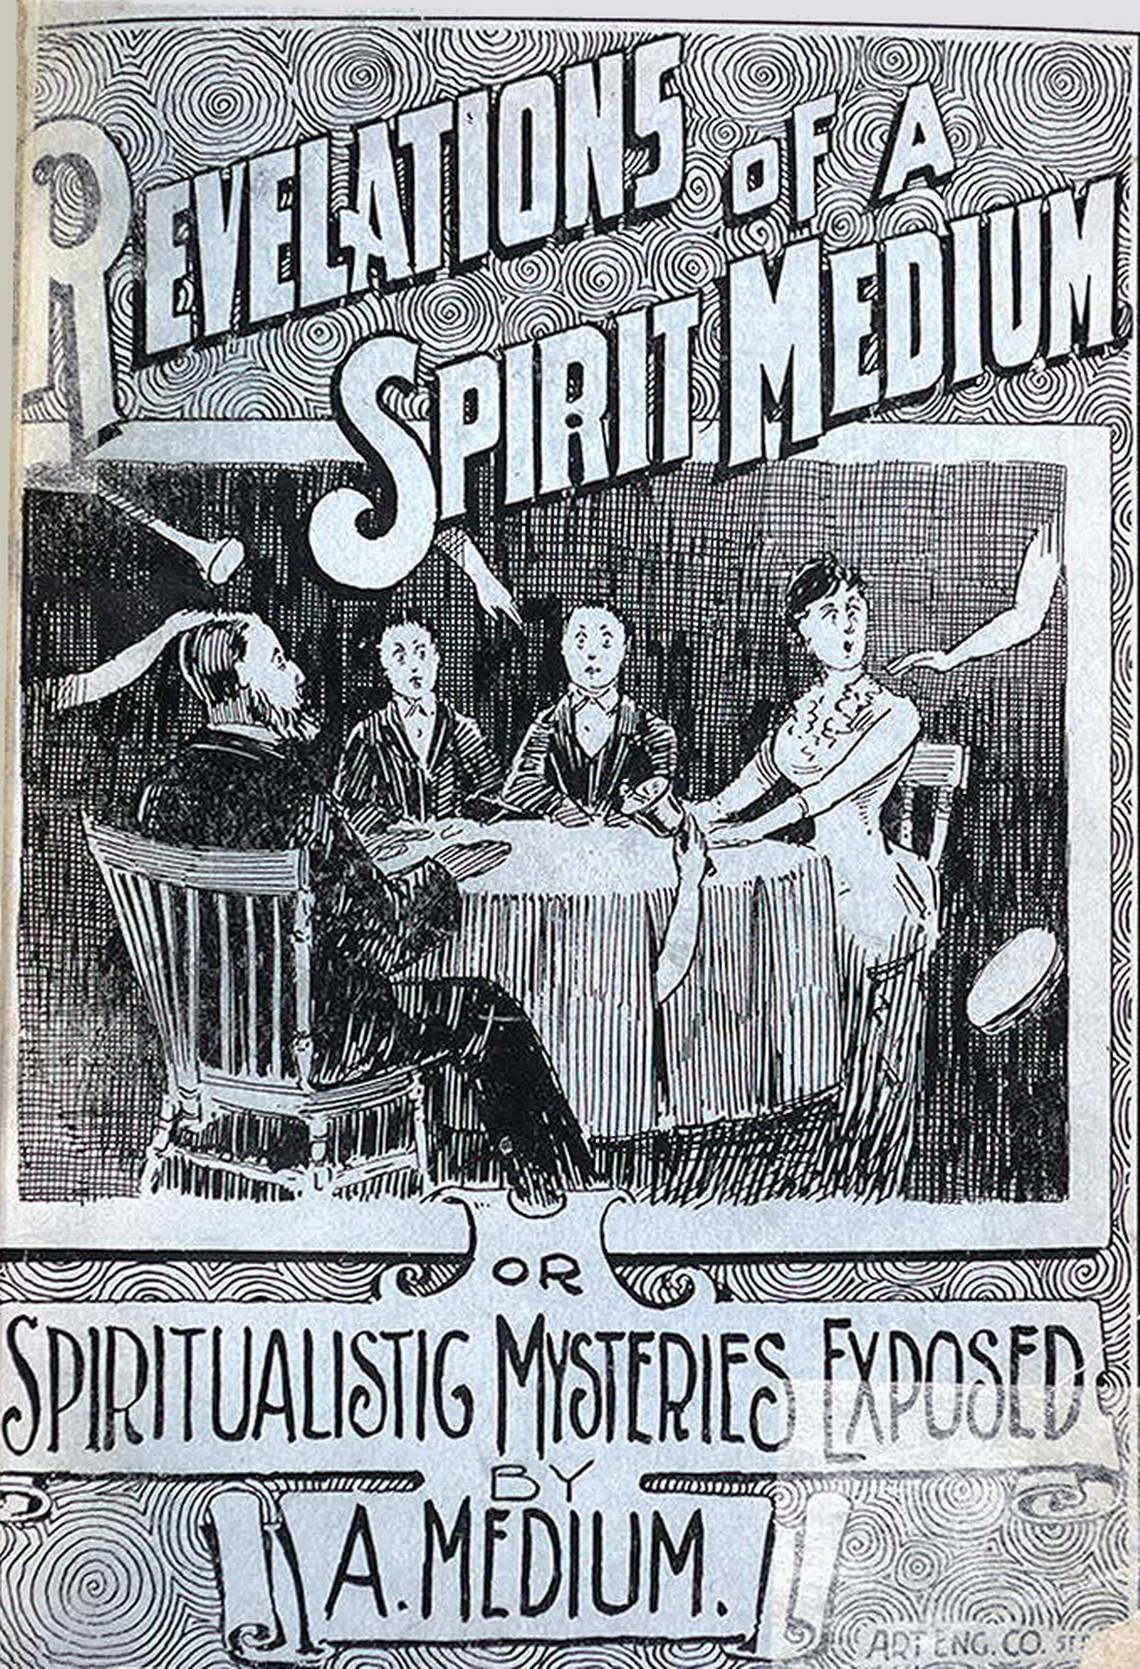 Cover of Revelations of a Spirit Medium, published in 1891.